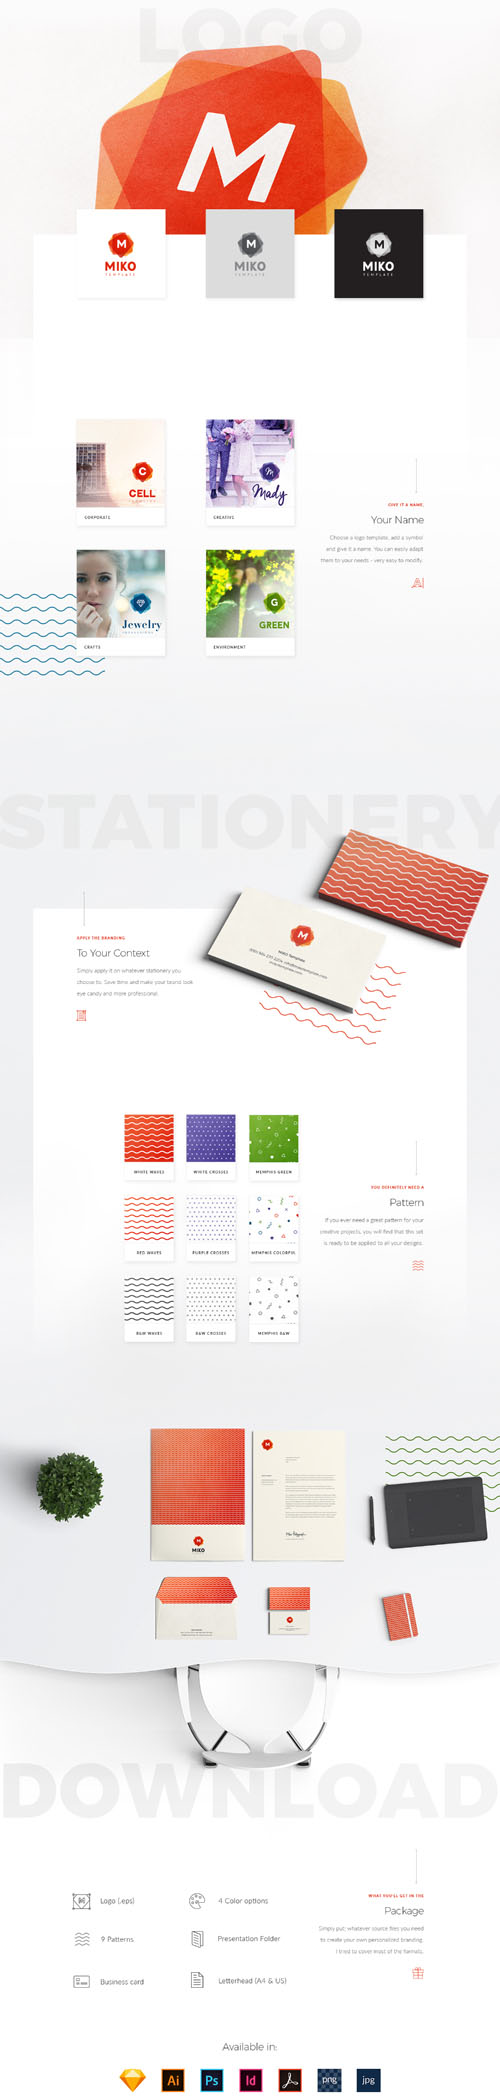 MIKO Logo Pattern Stationery Templates [AI/EPS/PSD/INDD/Sketch]